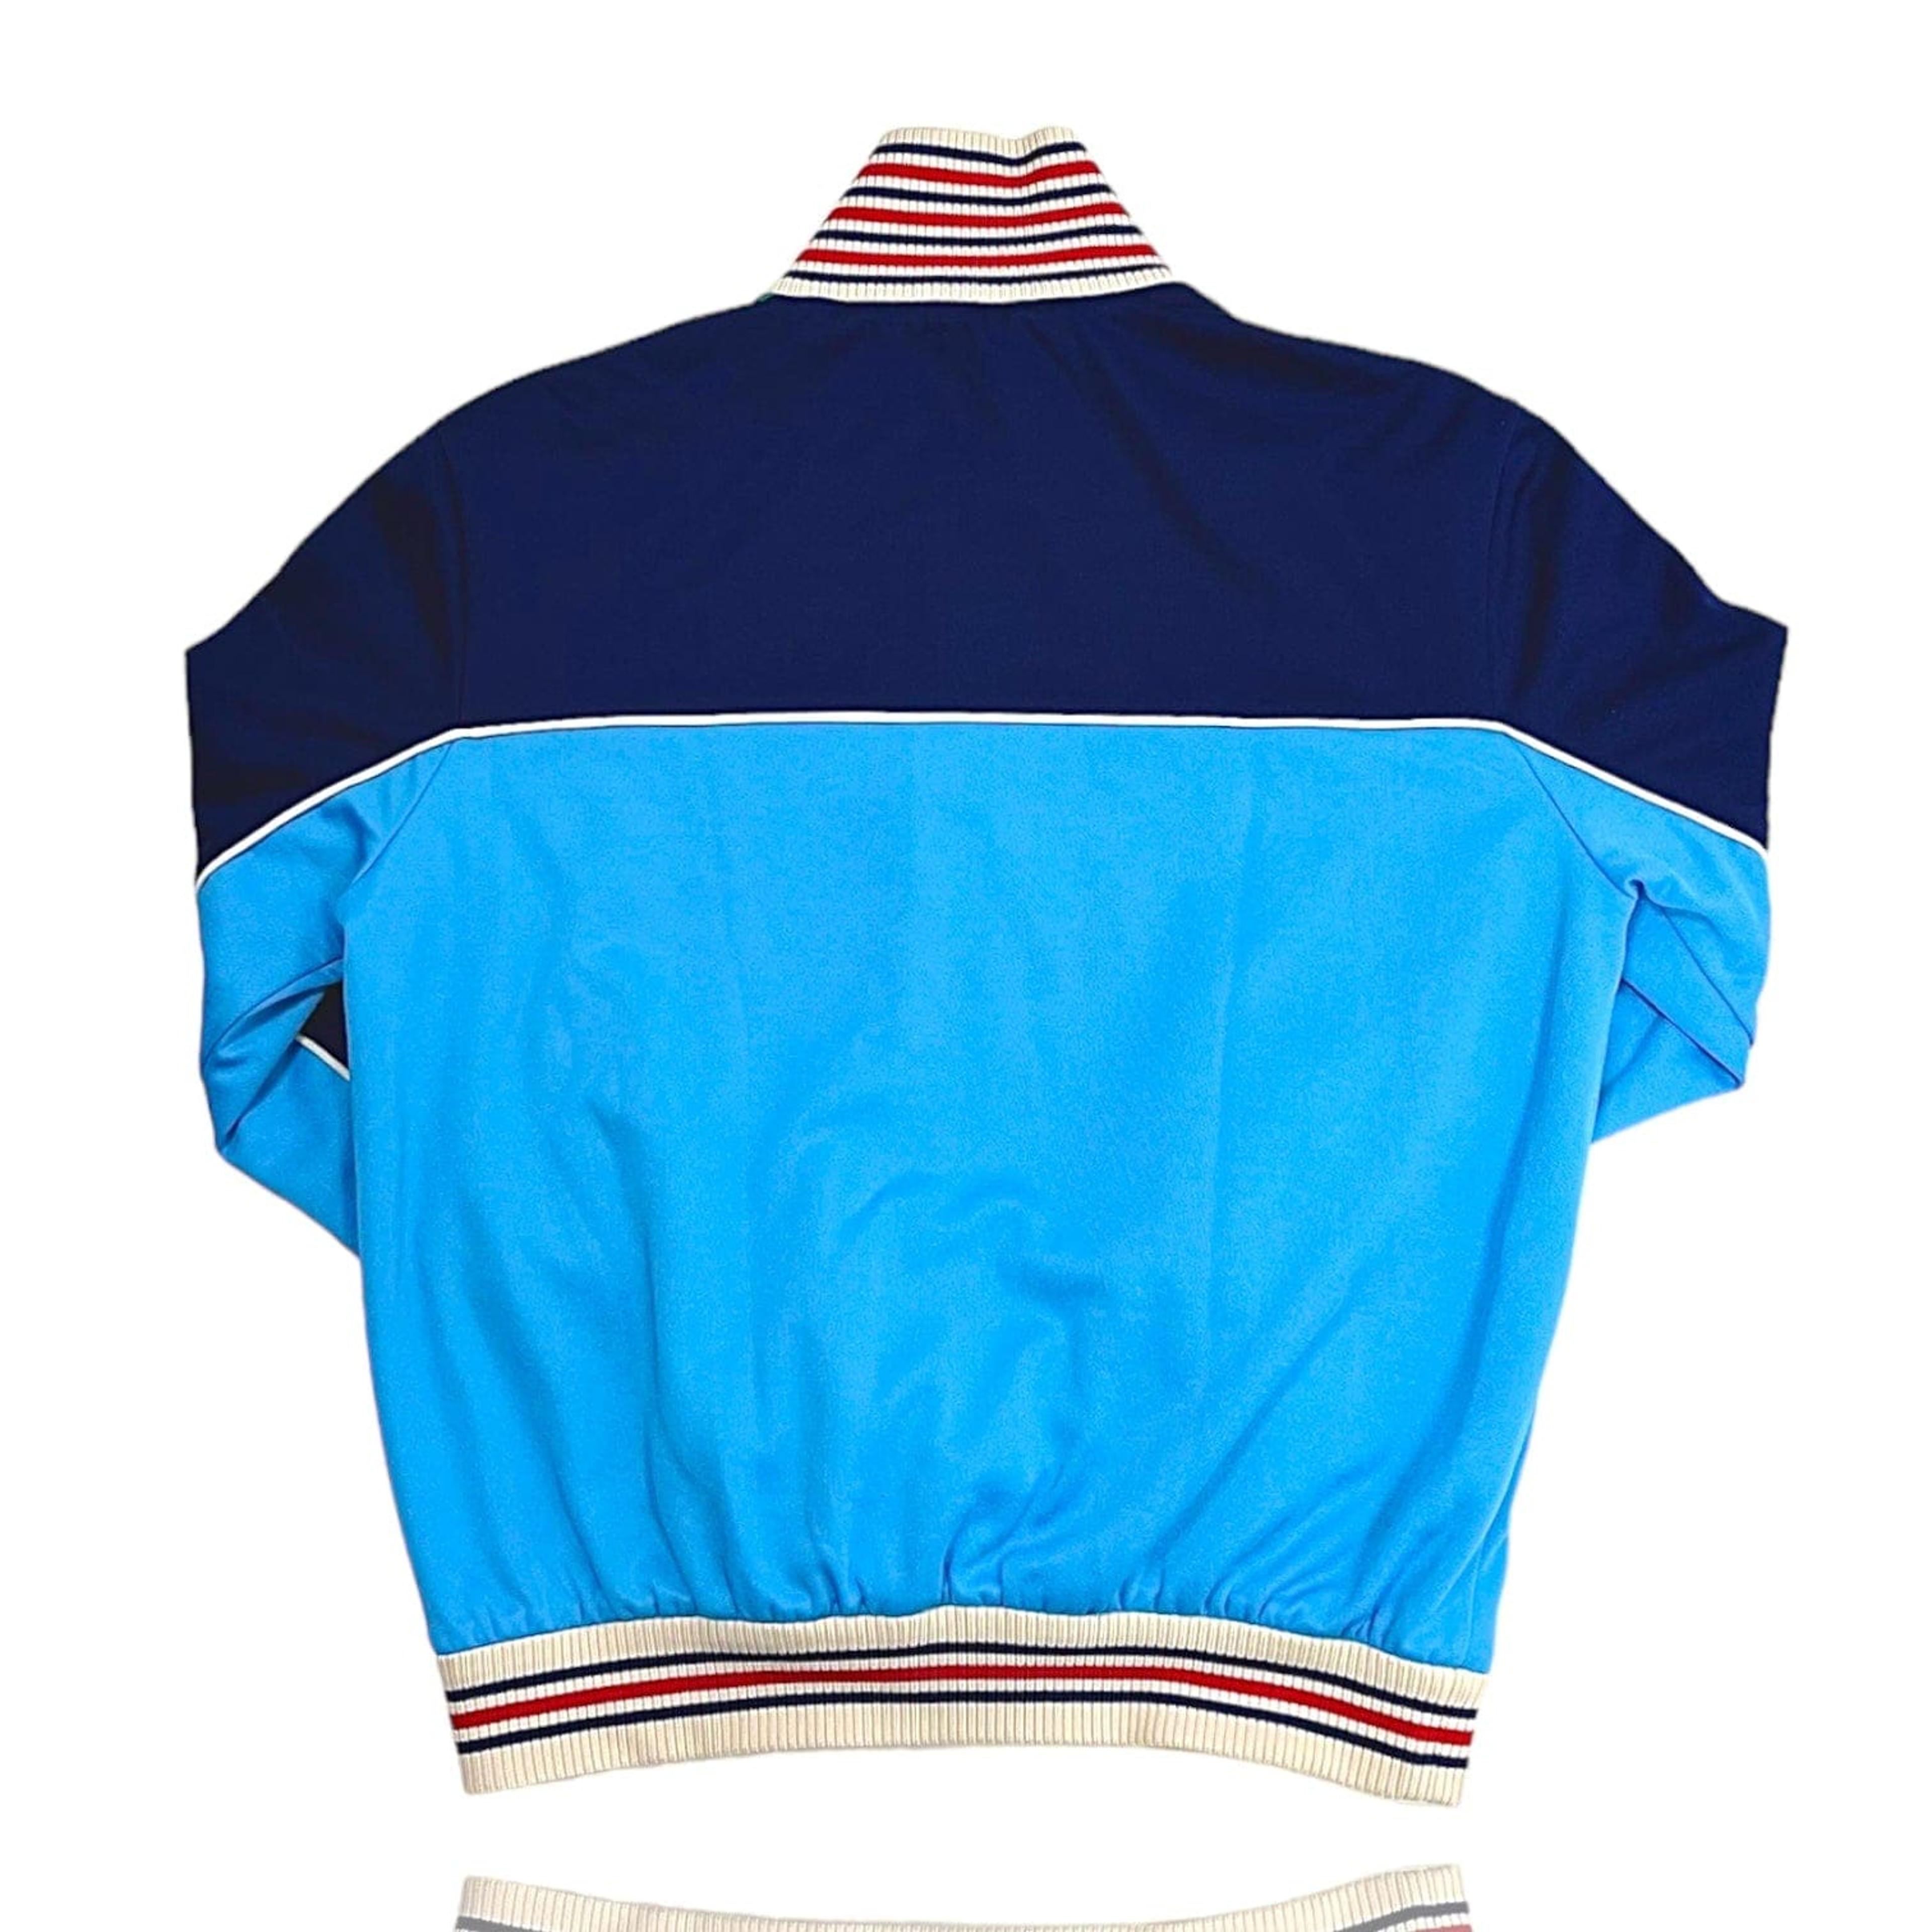 Alternate View 1 of Gucci GG Patch Technical Track Jacket Blue Pre-Owned